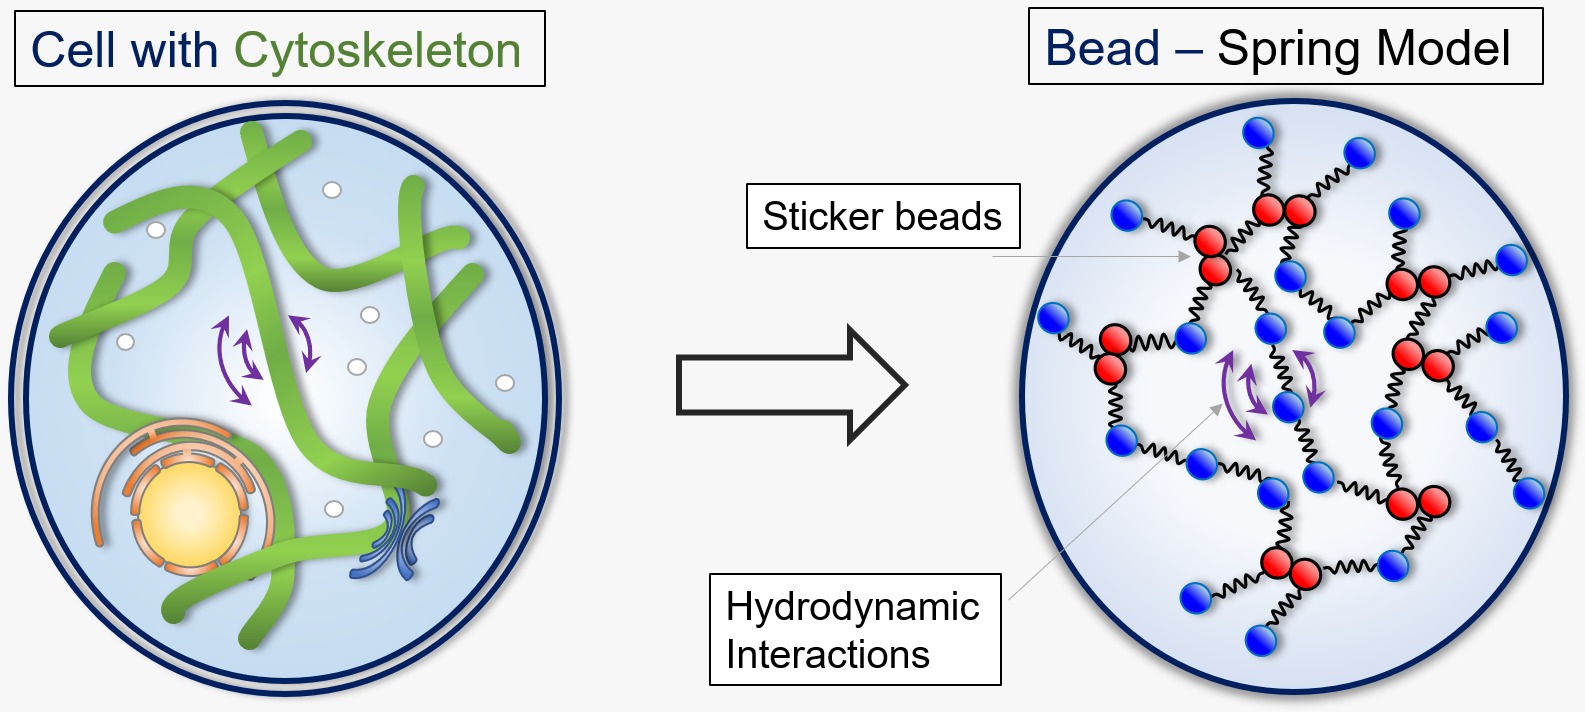 Biopolymer network and an equivalent bead-spring model